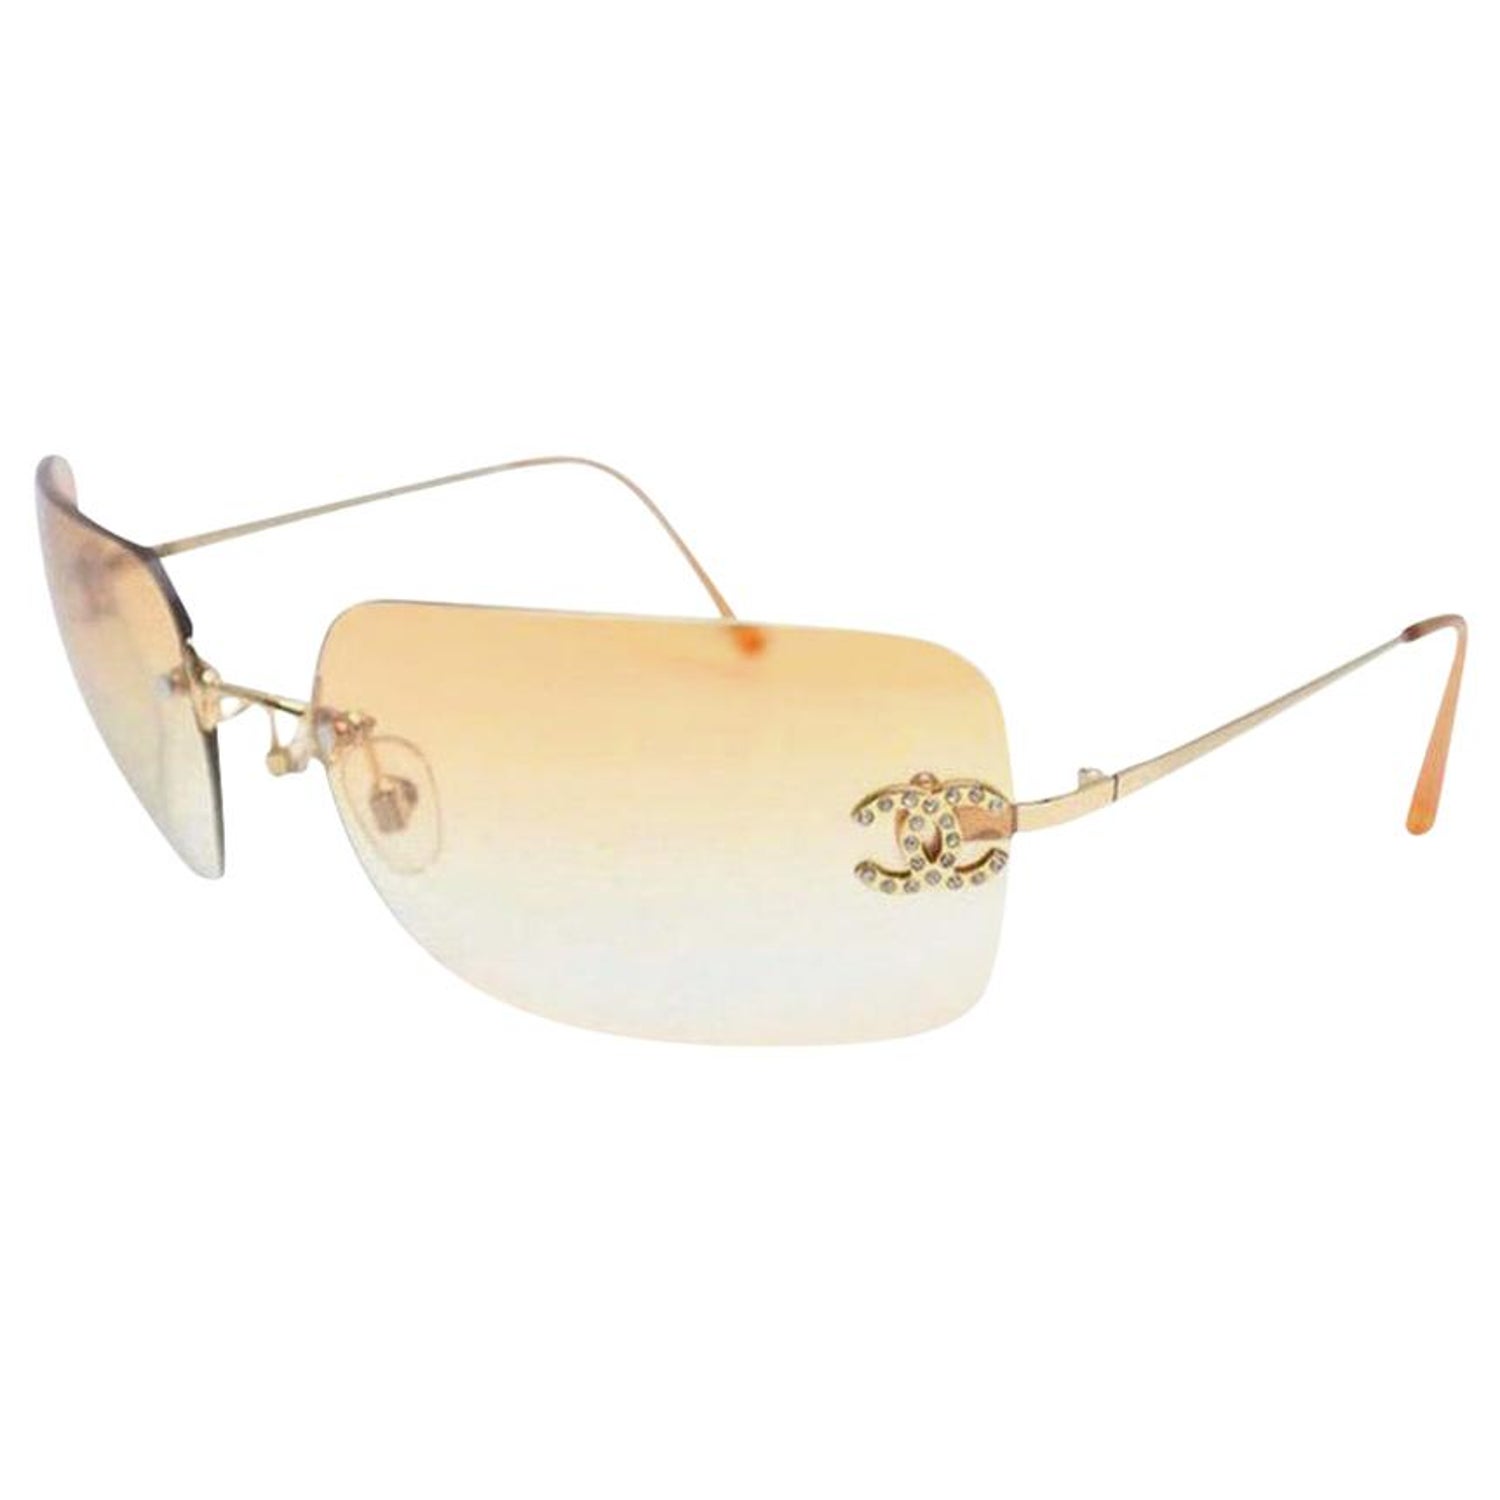 Chanel Sunglasses With Rhinestones - 4 For Sale on 1stDibs